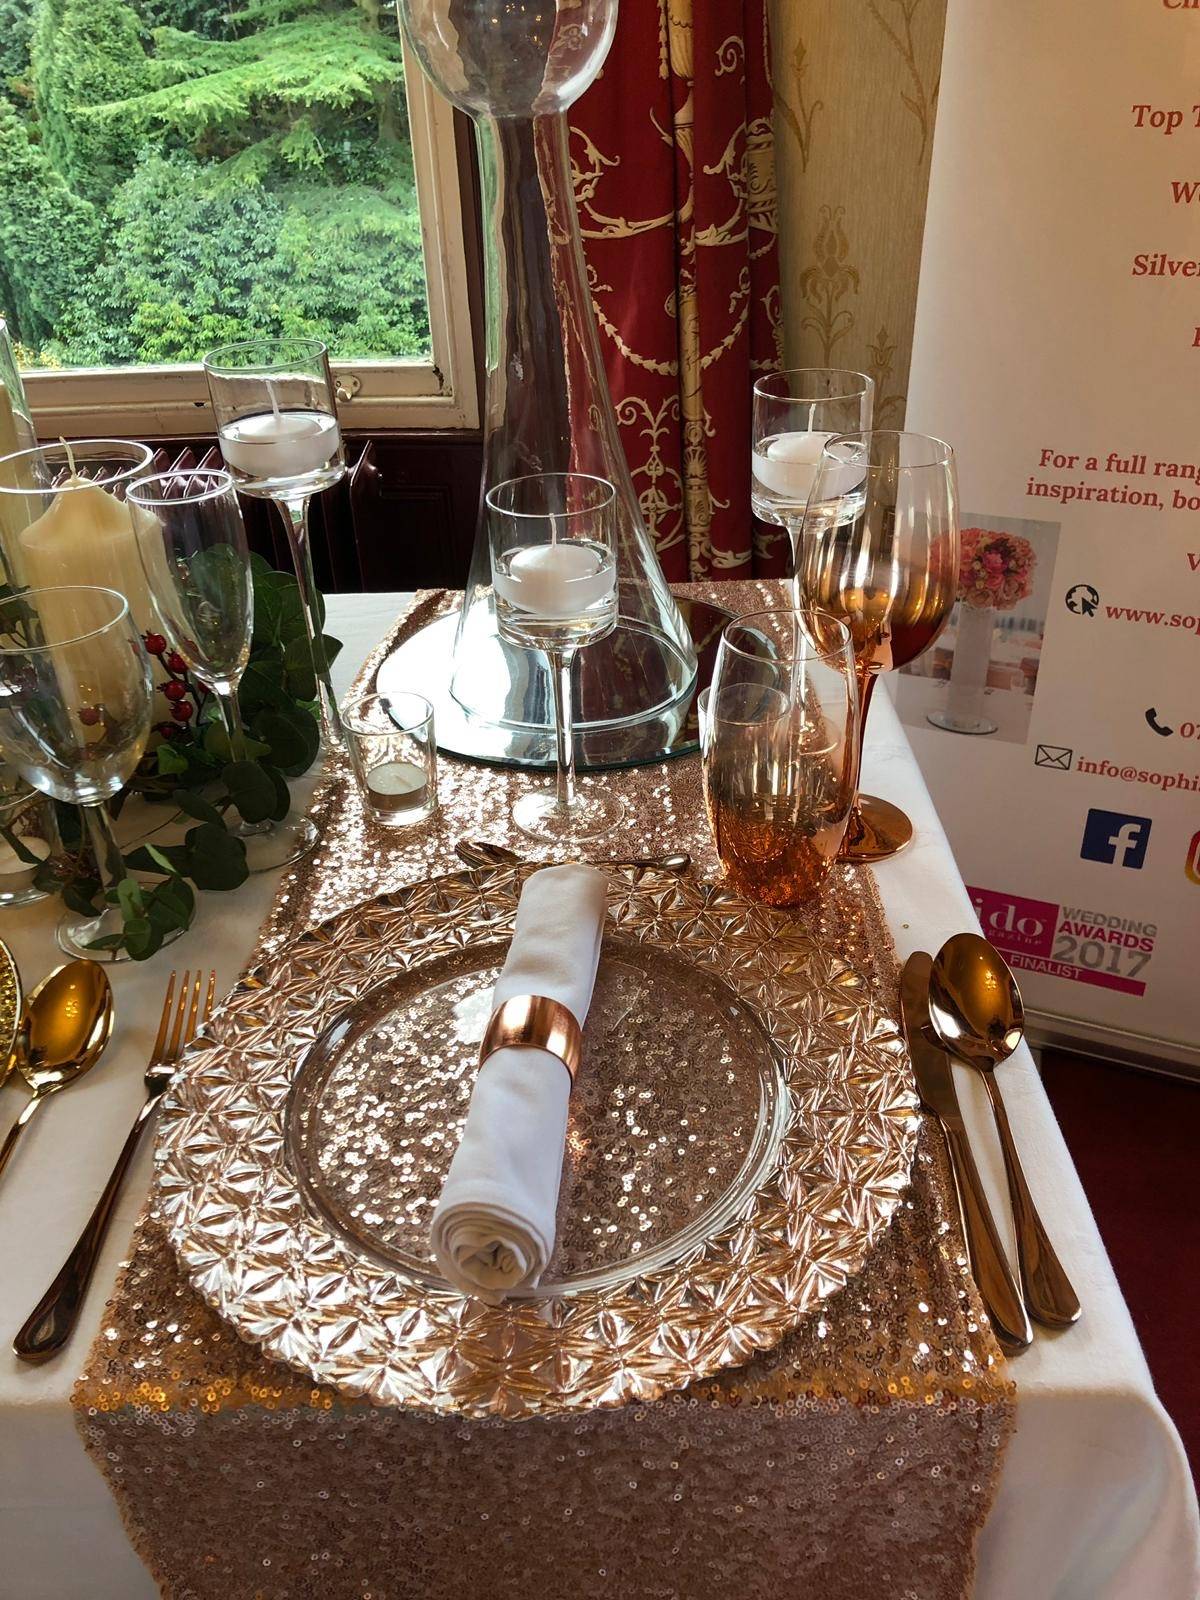 a table set for a formal dinner with wine glasses and silverware.